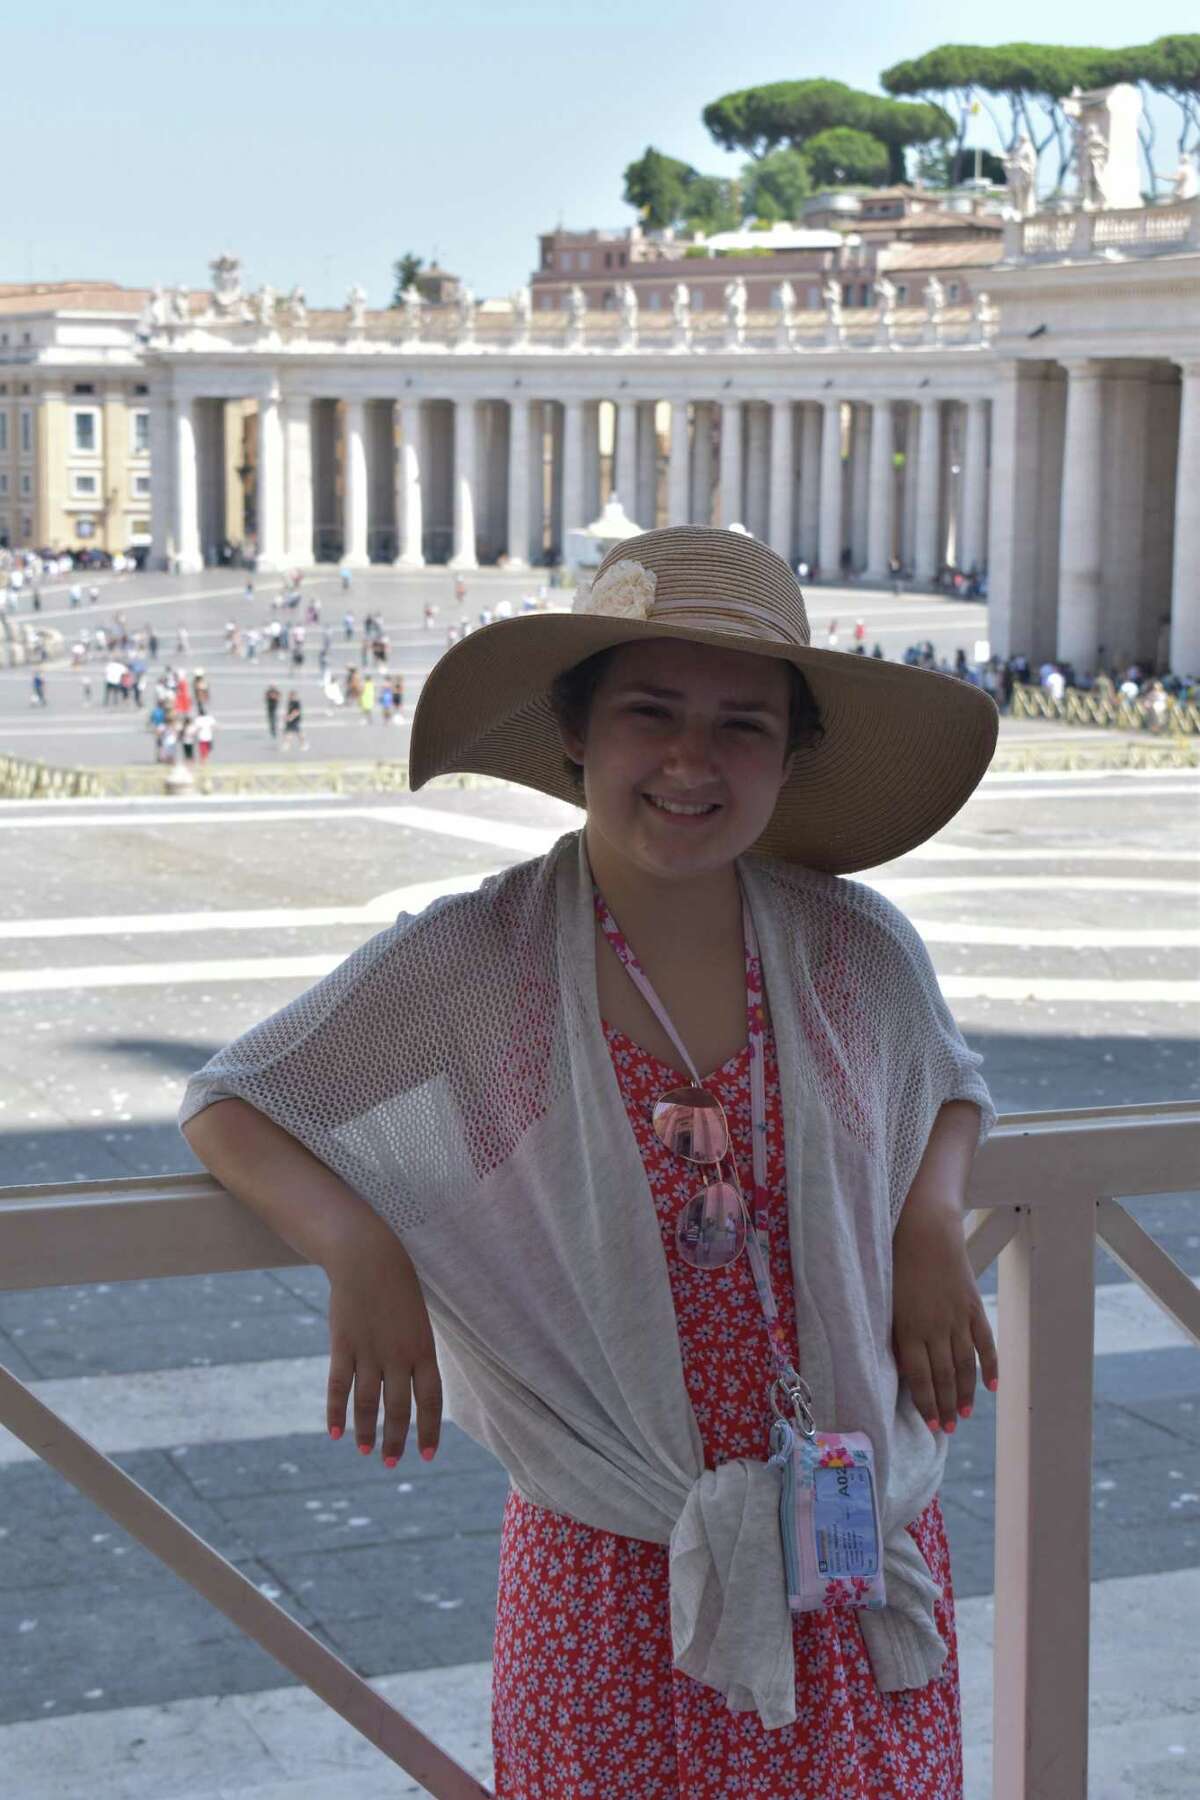 Hannah Sousa, who was diagnosed with leukemia last year, recently received a Mediterranean cruise from Make-A-Wish CT.